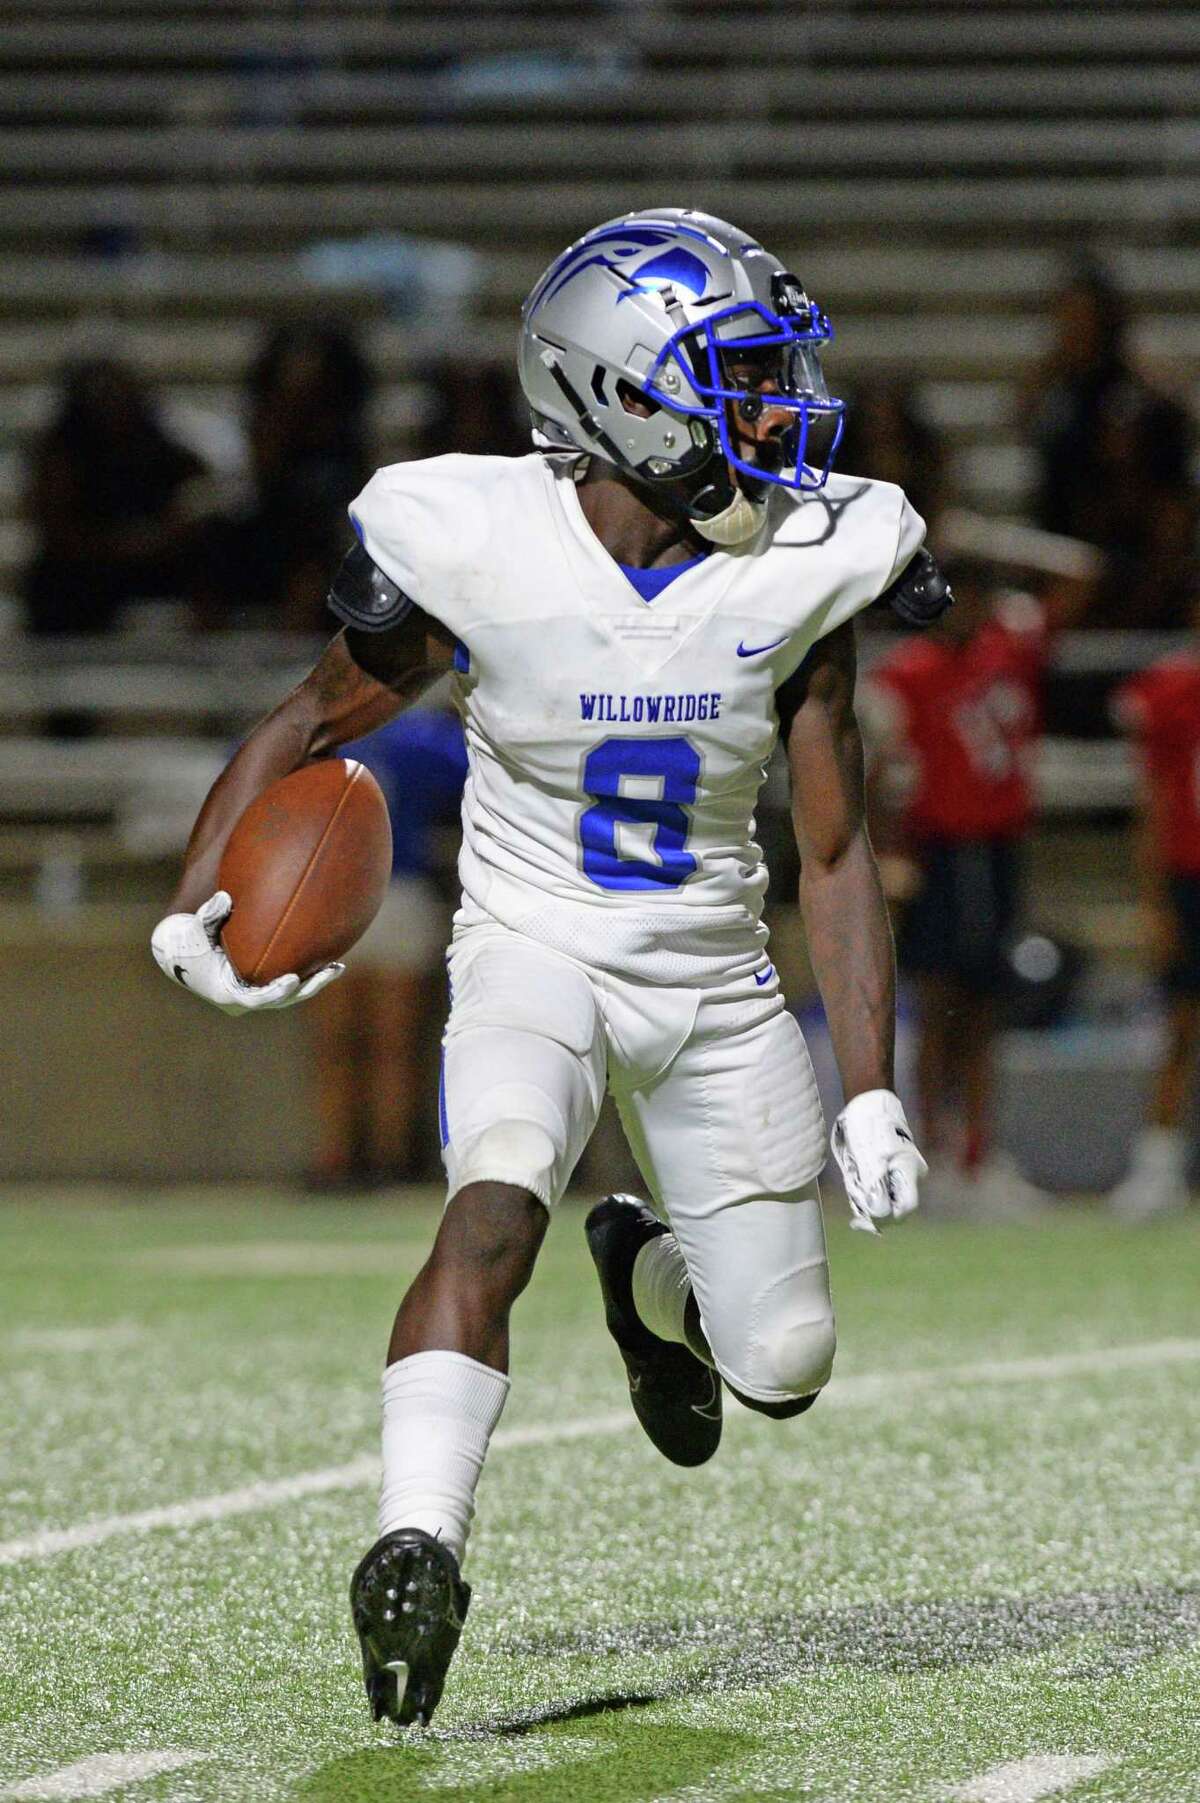 Javion Chatman (8) of Willowridge carries the ball in the fourth quarter of a high school football game between the Dulles Vikings and the Willowridge Eagles on Friday, August 30, 2019 at Mercer Stadium, Sugar Land, TX.